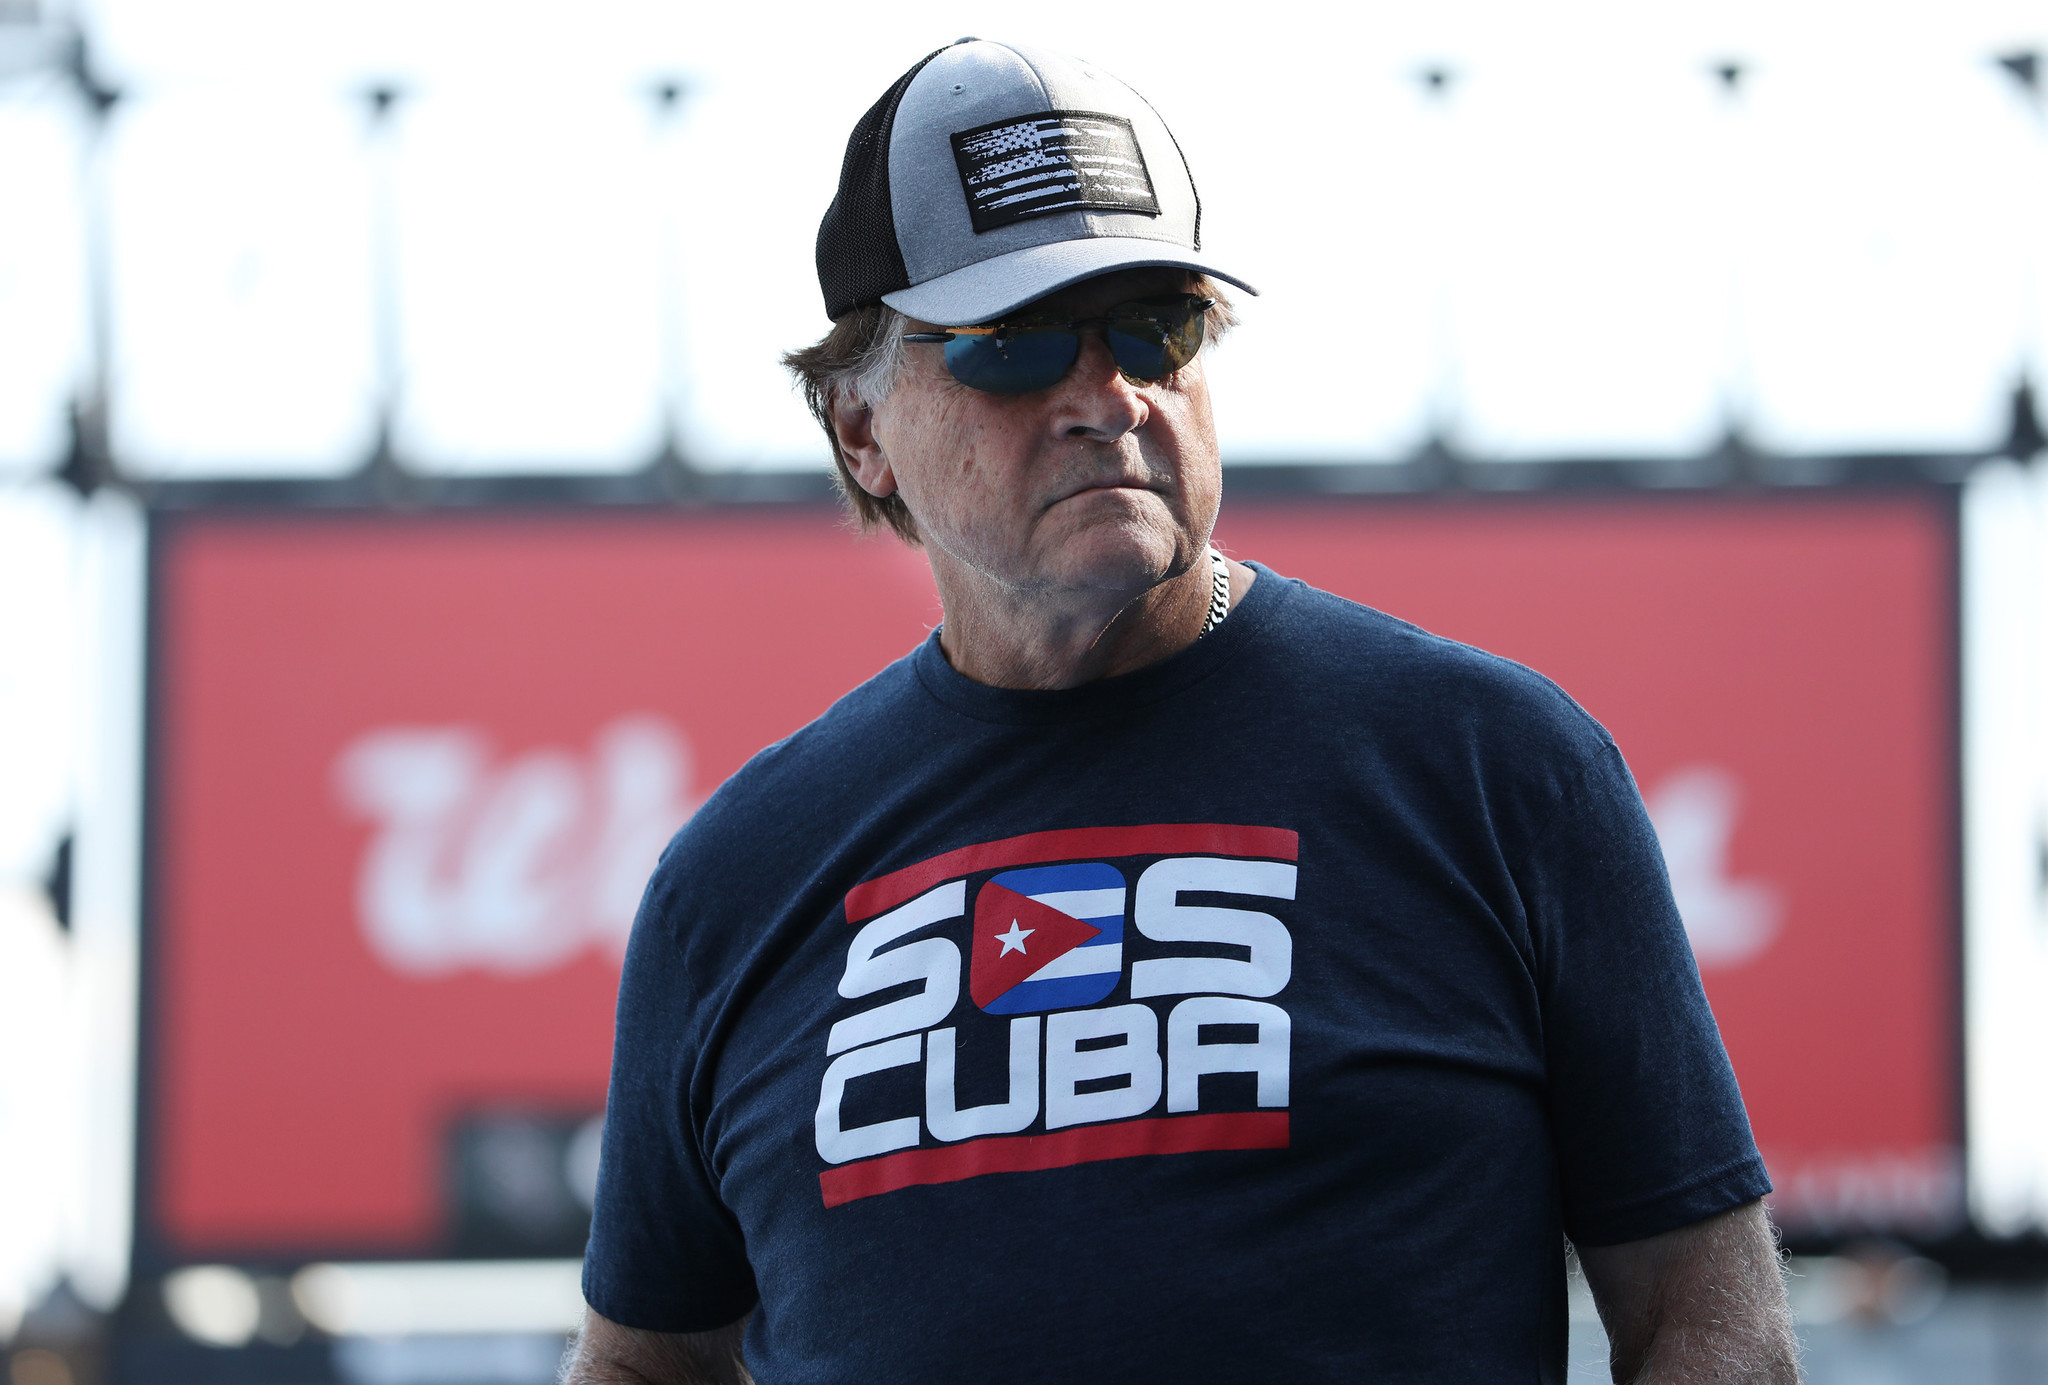 La Russa finished managing the White Sox, won't return in 2023